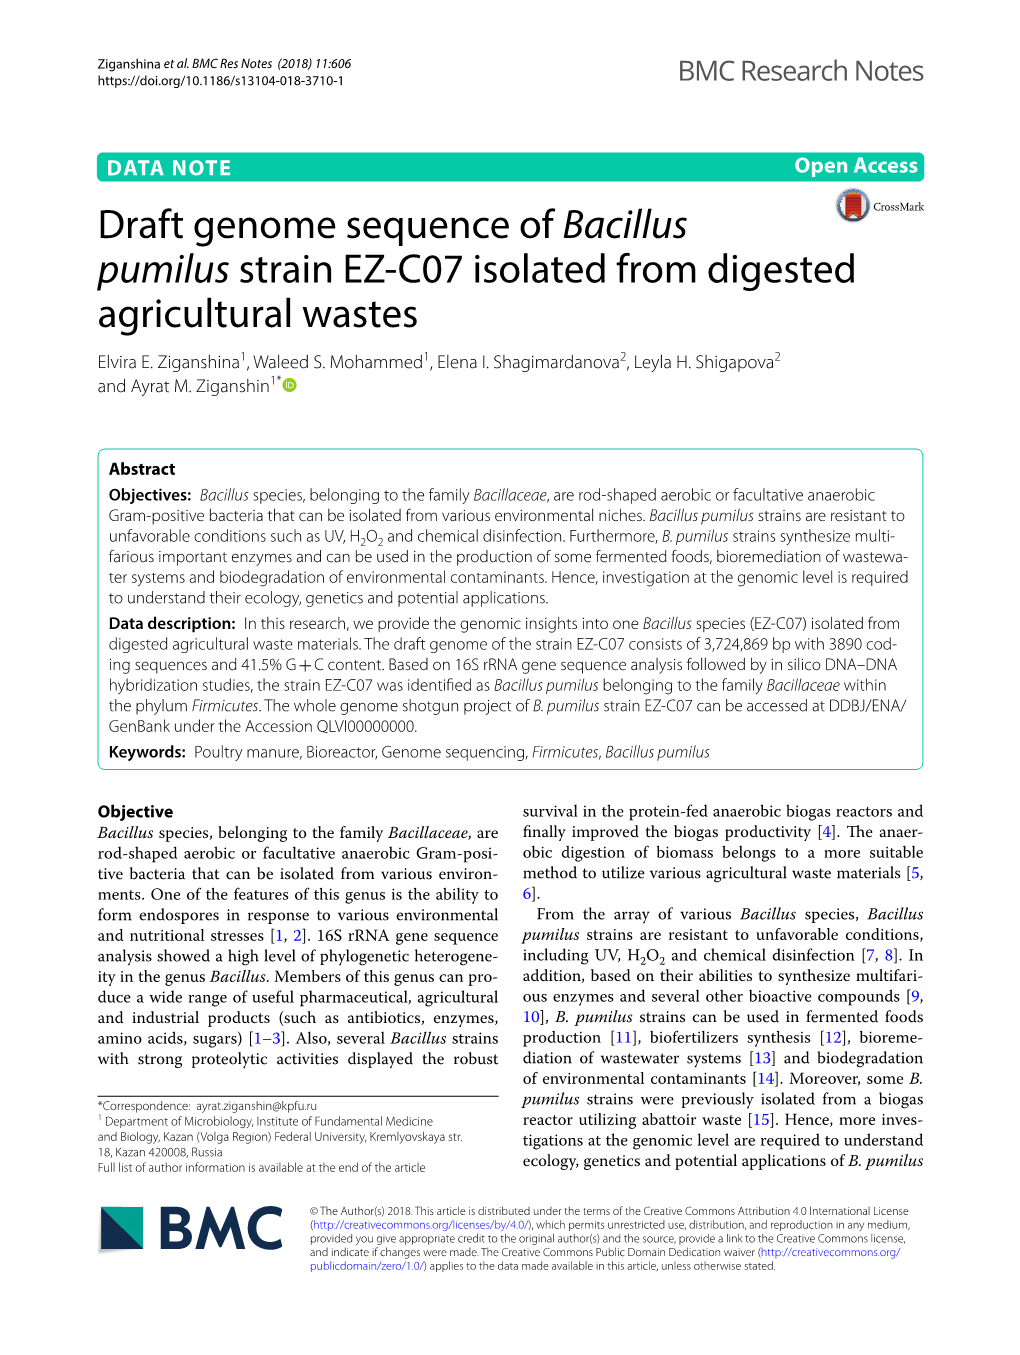 Draft Genome Sequence of Bacillus Pumilus Strain EZ-C07 Isolated From